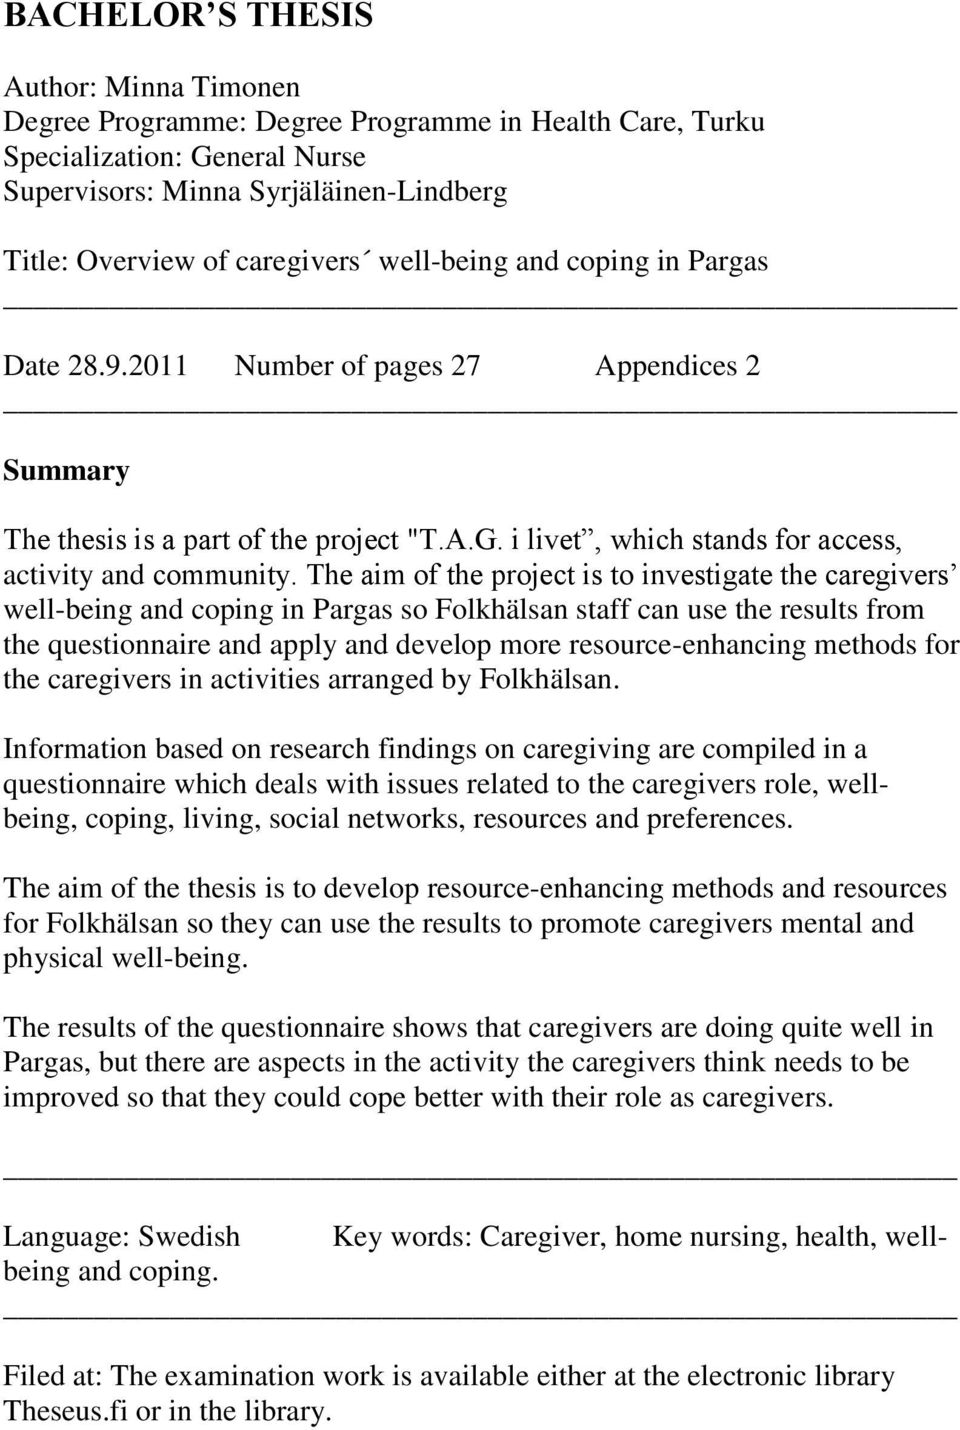 The aim of the project is to investigate the caregivers well-being and coping in Pargas so Folkhälsan staff can use the results from the questionnaire and apply and develop more resource-enhancing